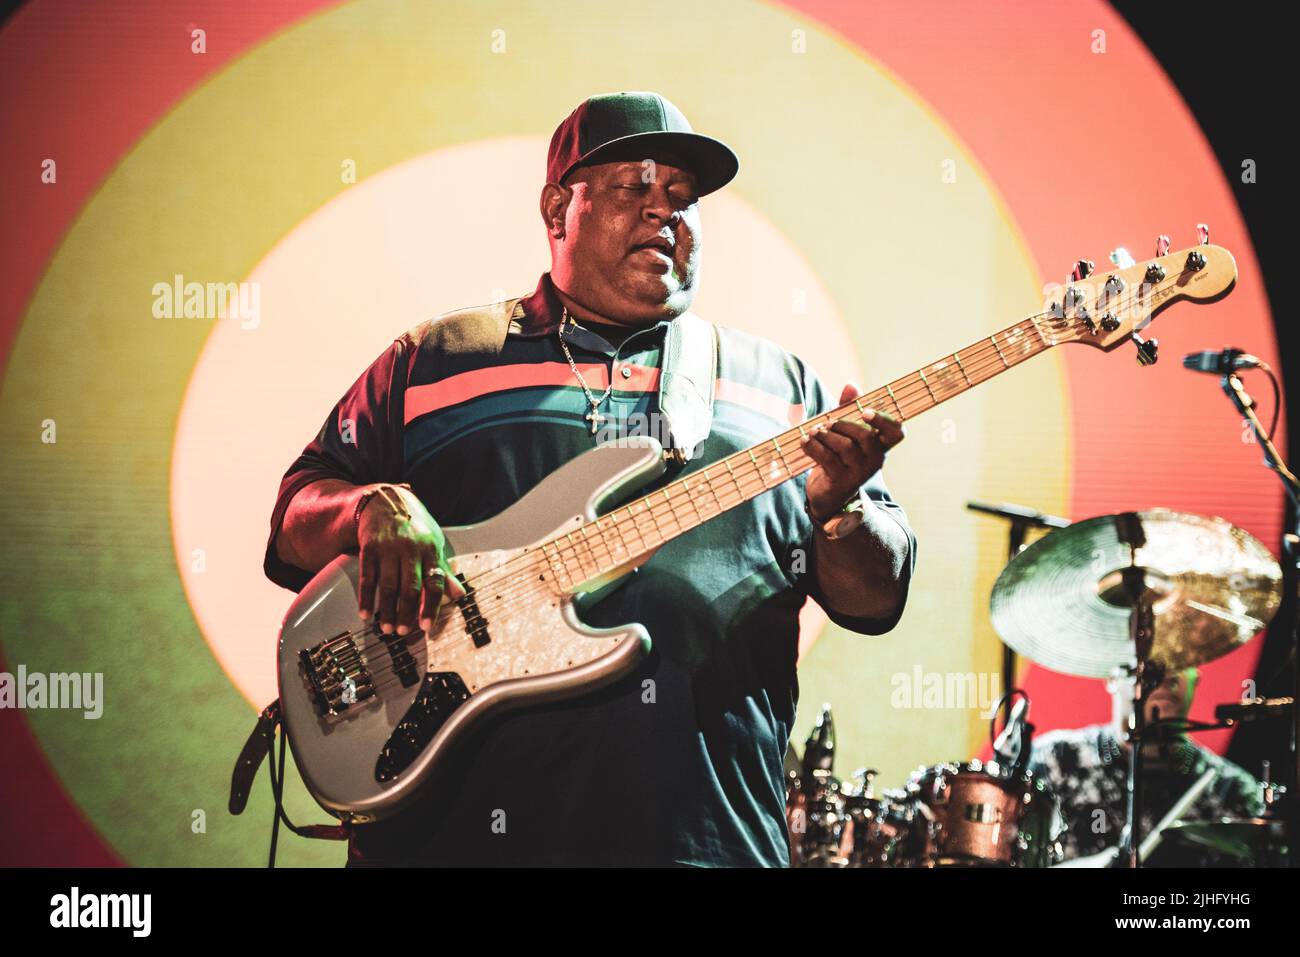 ITALY, GRUGLIASCO, JULY 2ND 2019: Juan Nelson, bassist of the American rock band “Ben Harper & The Innocent Criminals”, performing live on stage at the “Gruvillage Festival” 2019 edition Stock Photo